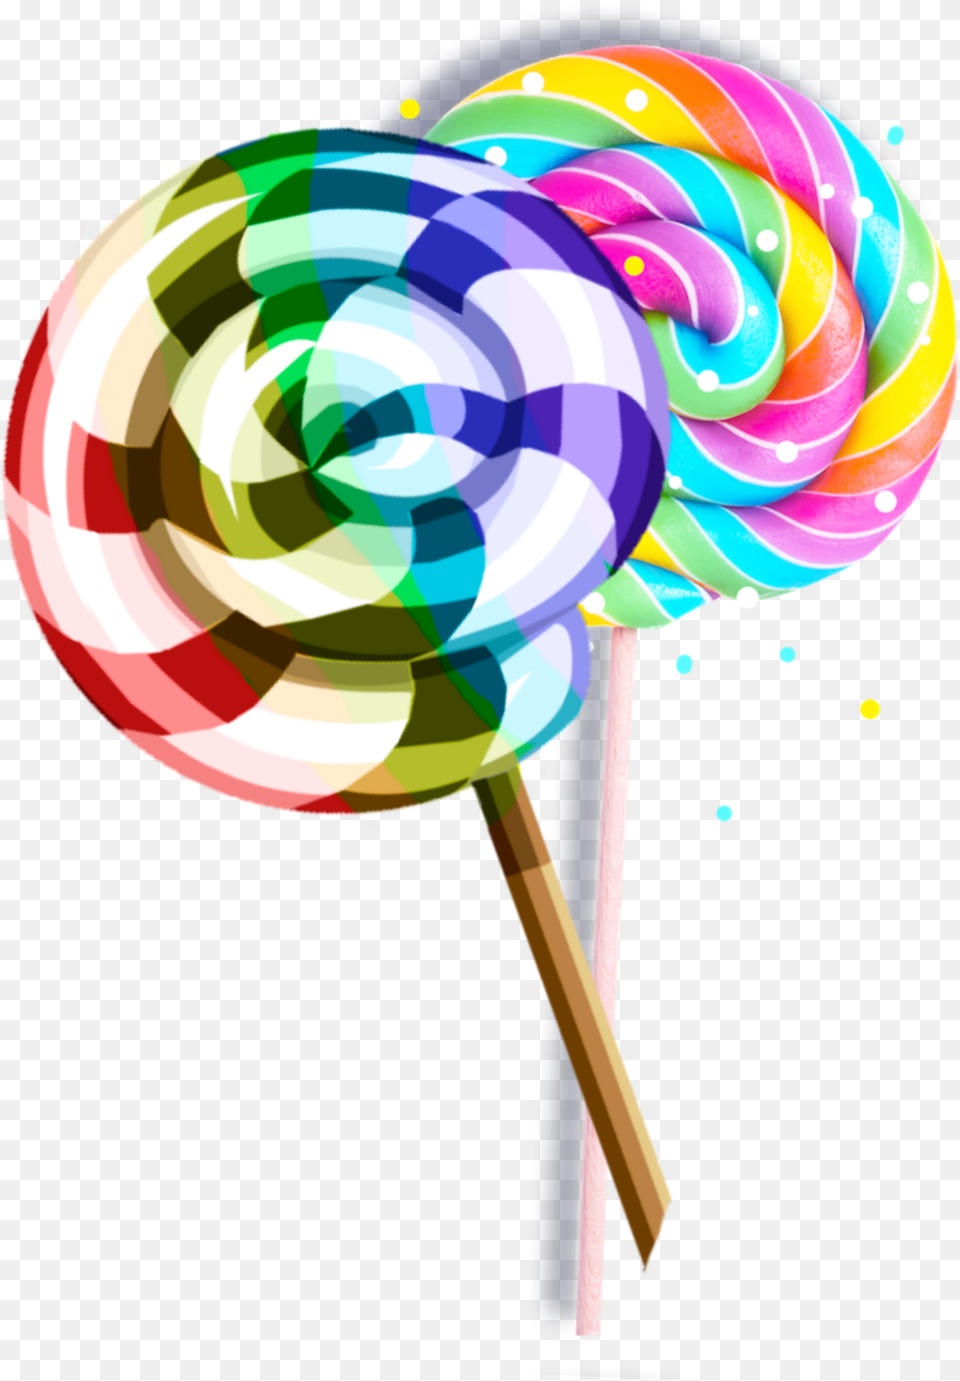 Mq Lollipop Rainbow Rainbows Candy Sweet Candy Sweet, Food, Sweets Png Image